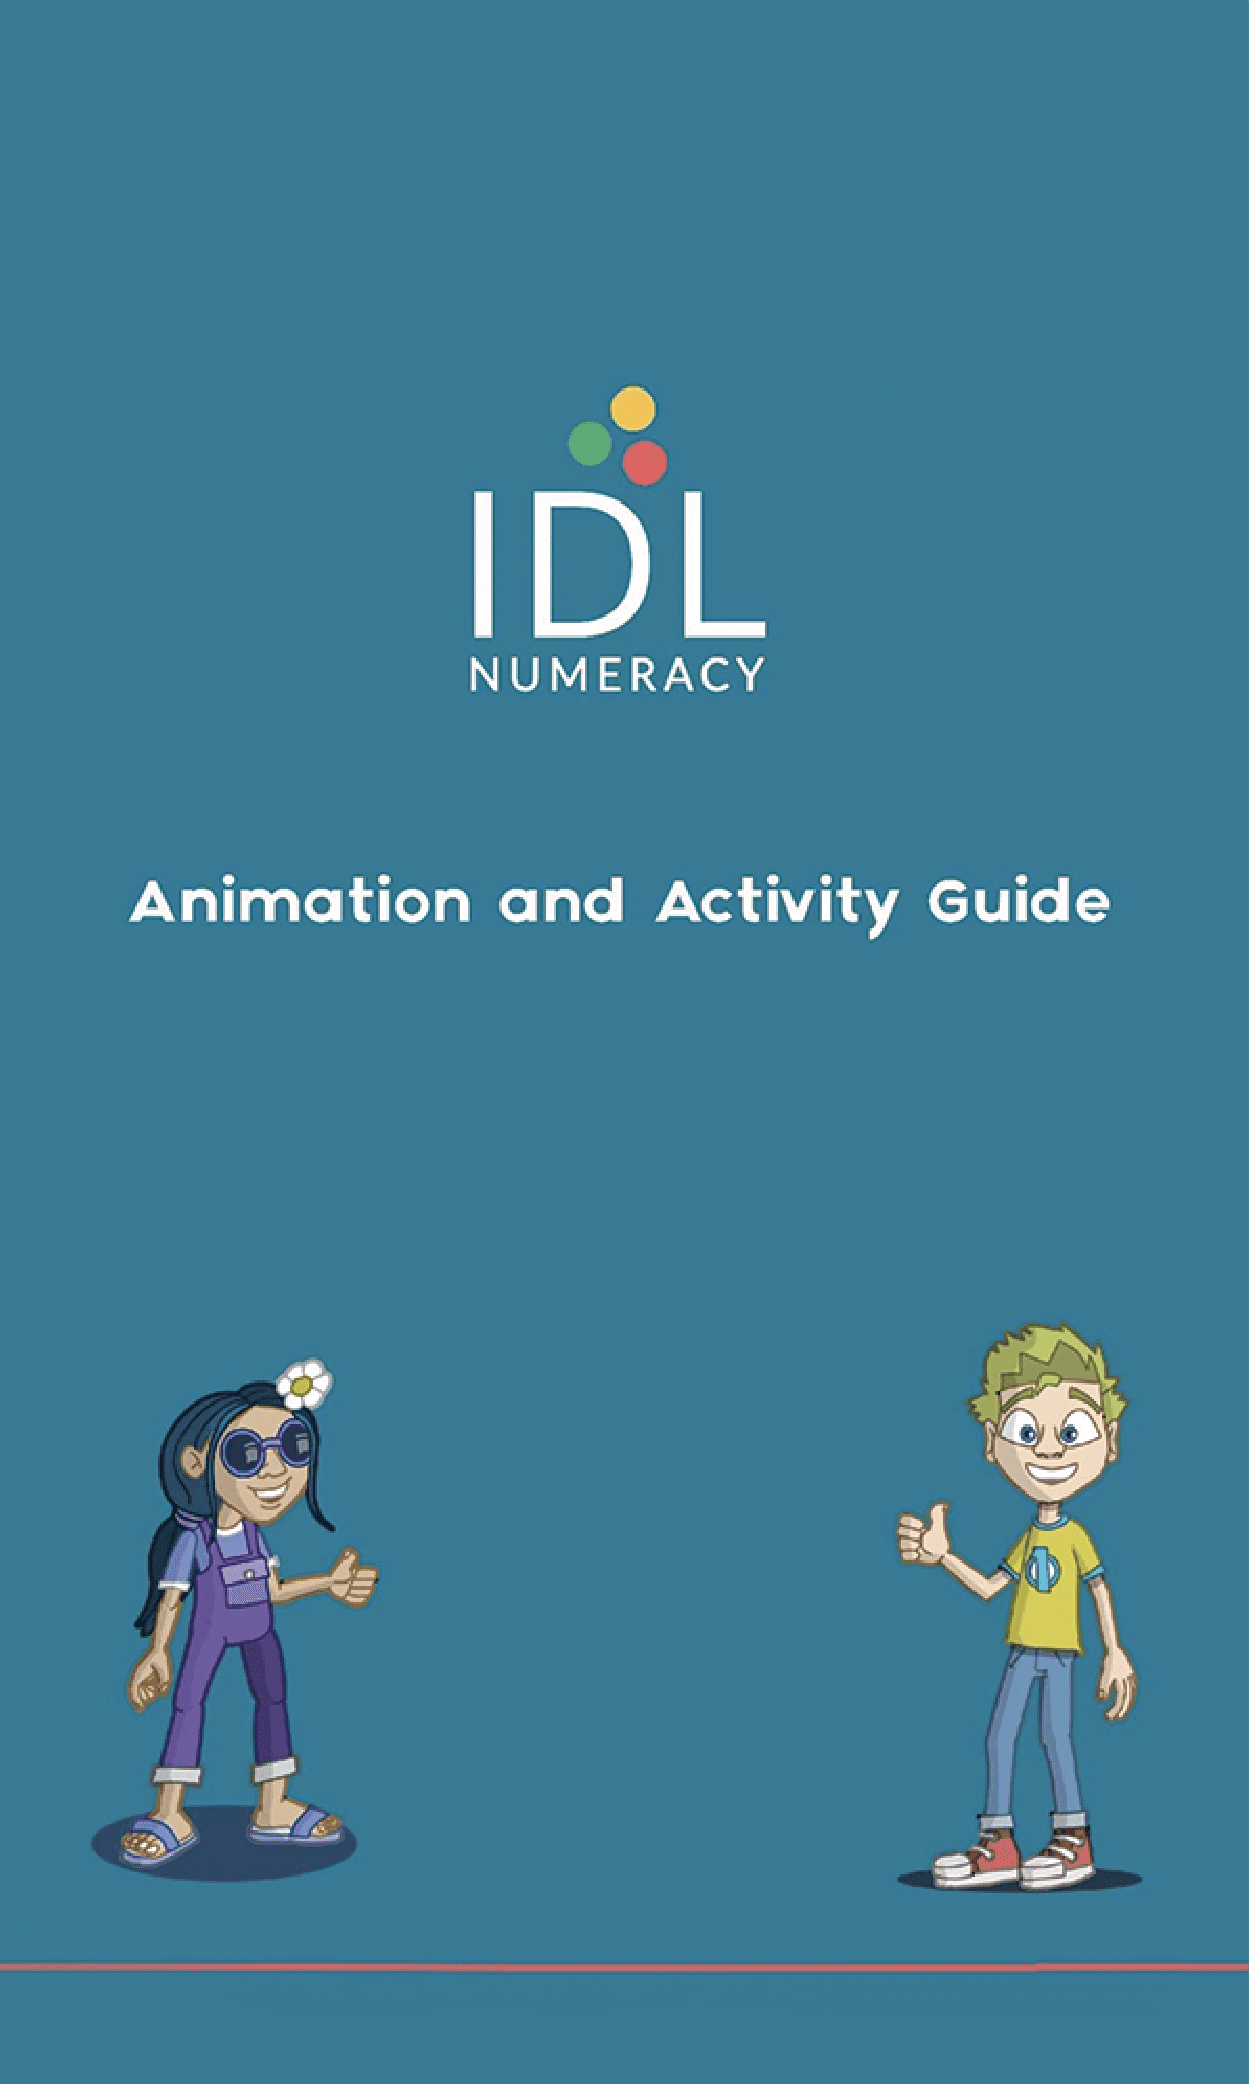 IDL Animation and Activity Guide